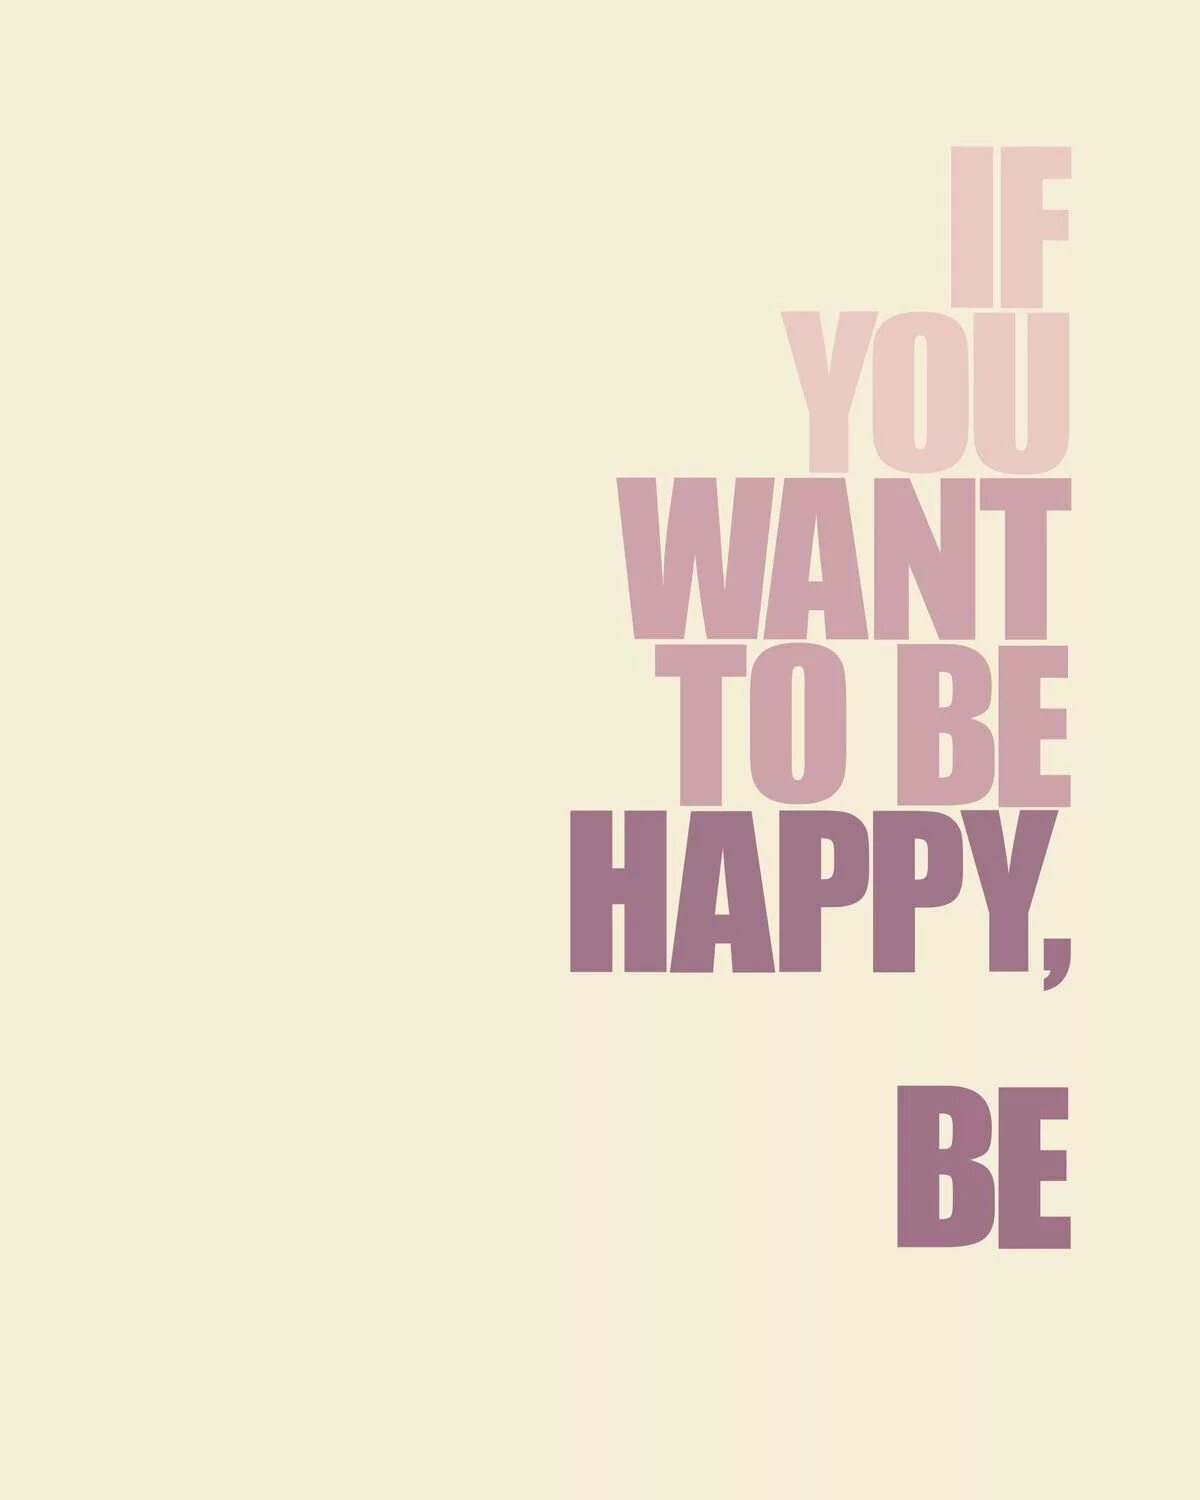 If you want to be Happy be. Be Happy. Цитаты be Happy be. I want to be Happy картинки. Be happy away